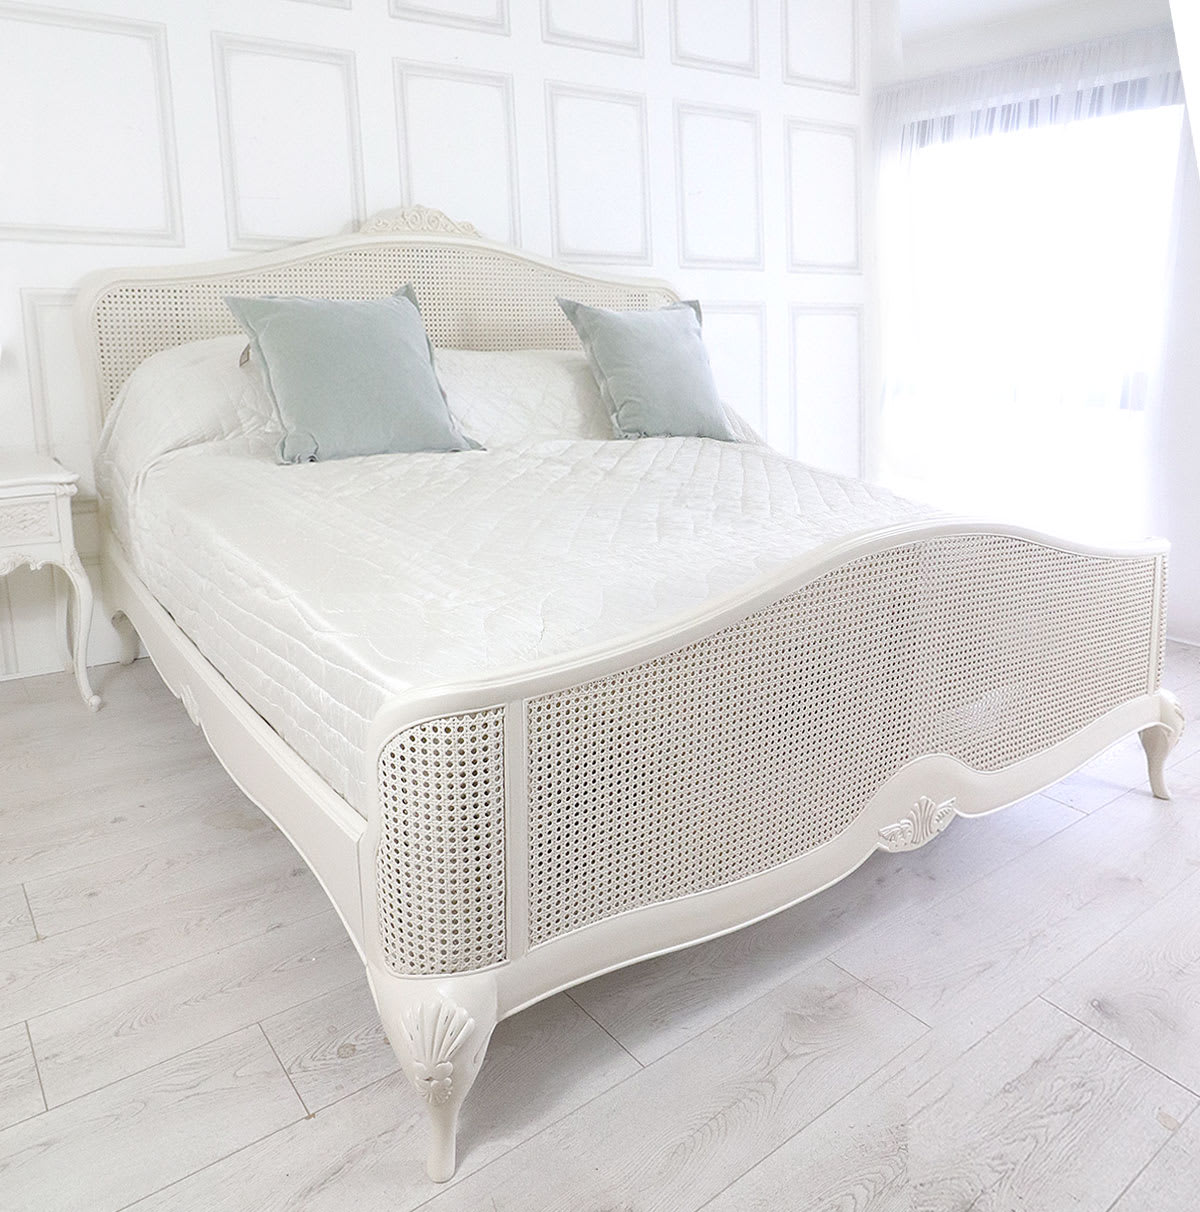 Buy Willis & Gambier Ivory Rattan High End Bed Chateau Style